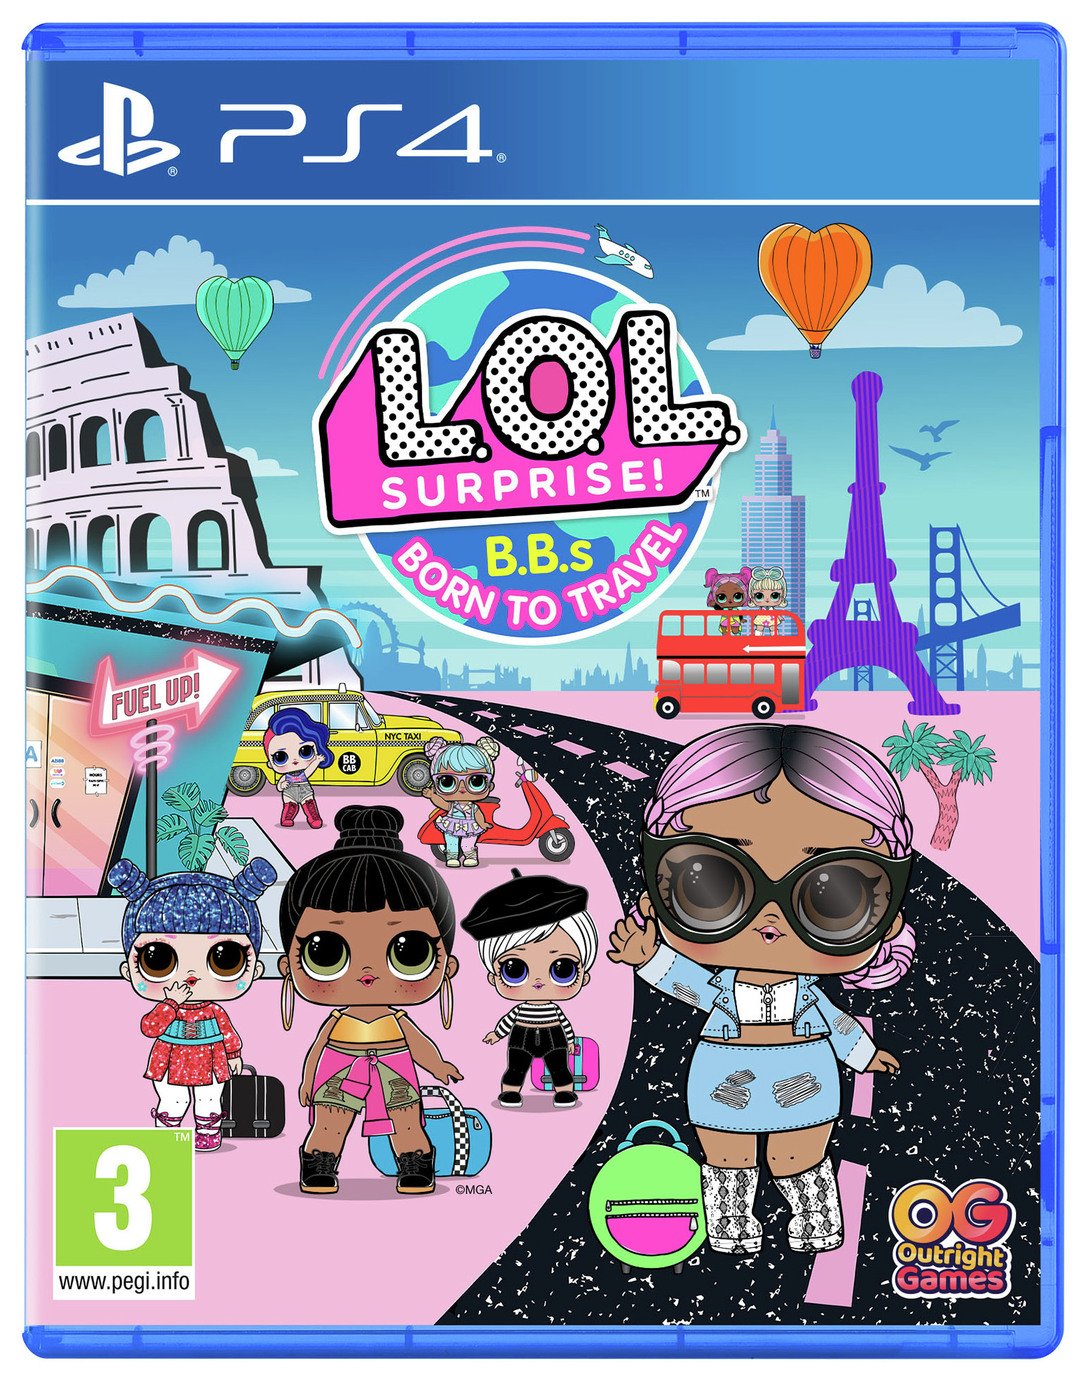 L.O.L. Surprise! B.B.s Born To Travel PS4 Game